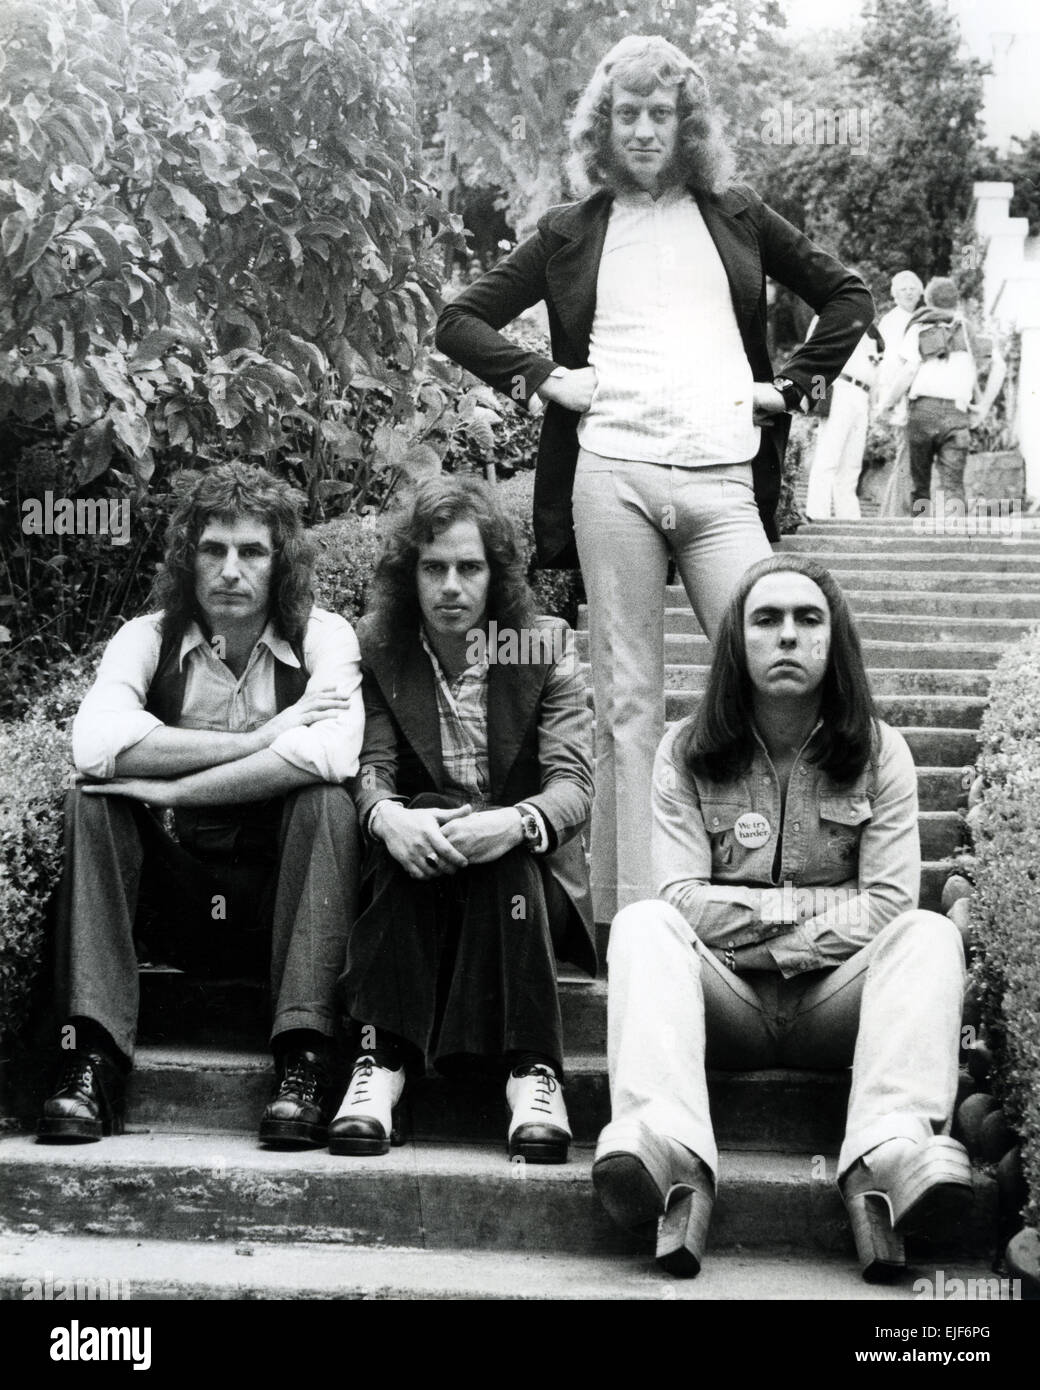 SLADE UK pop rock group about 1973. From left: Don Powell, Jim Lea, Noddy Holder, Dave Hill Stock Photo